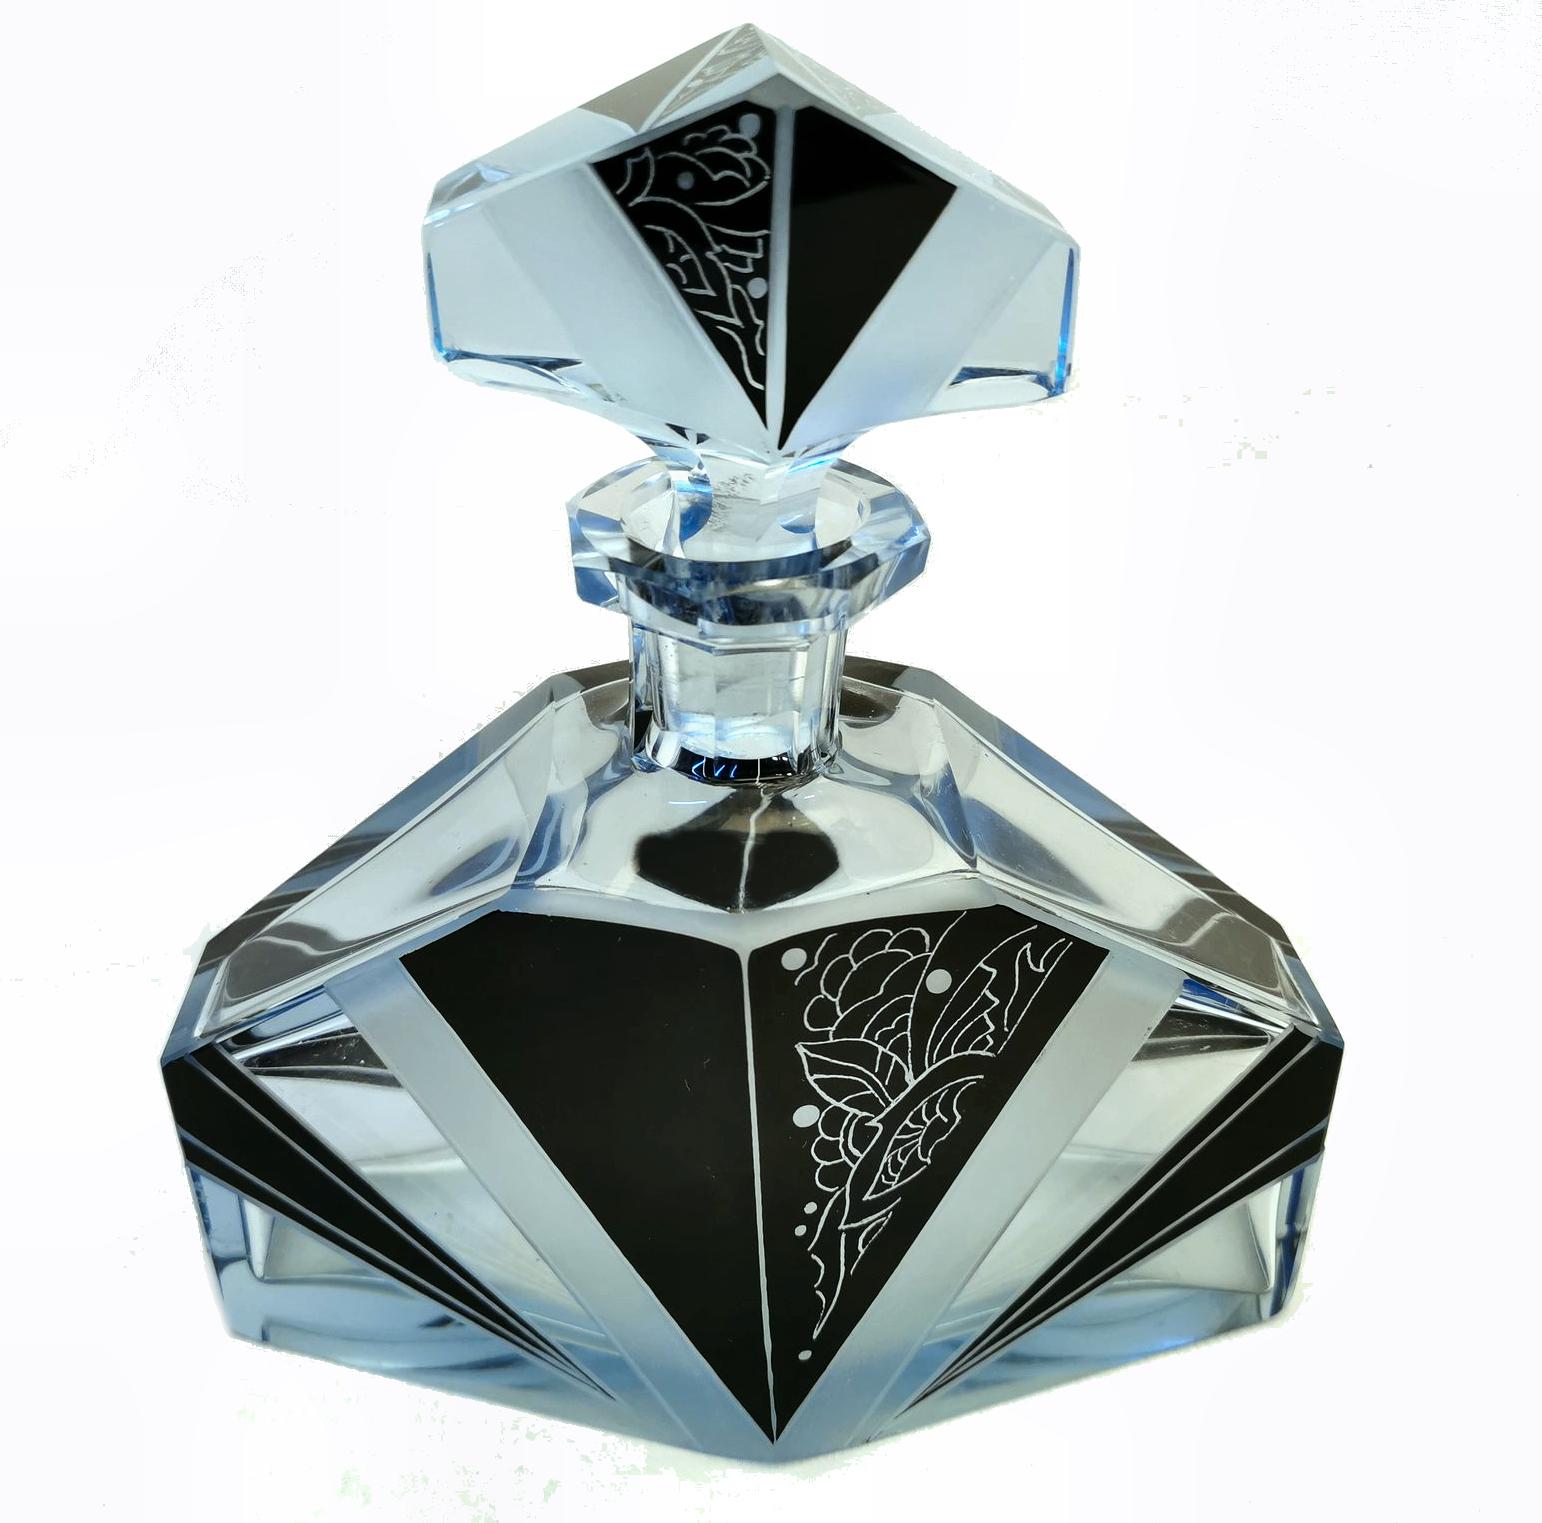 Beautiful Art Deco blue and black decanter set, a wonderful addition to a barware collection. Originating from Czech republic this striking set has a very desirable geometric pattern with blue glass and black overlay enamel decoration. No chips,